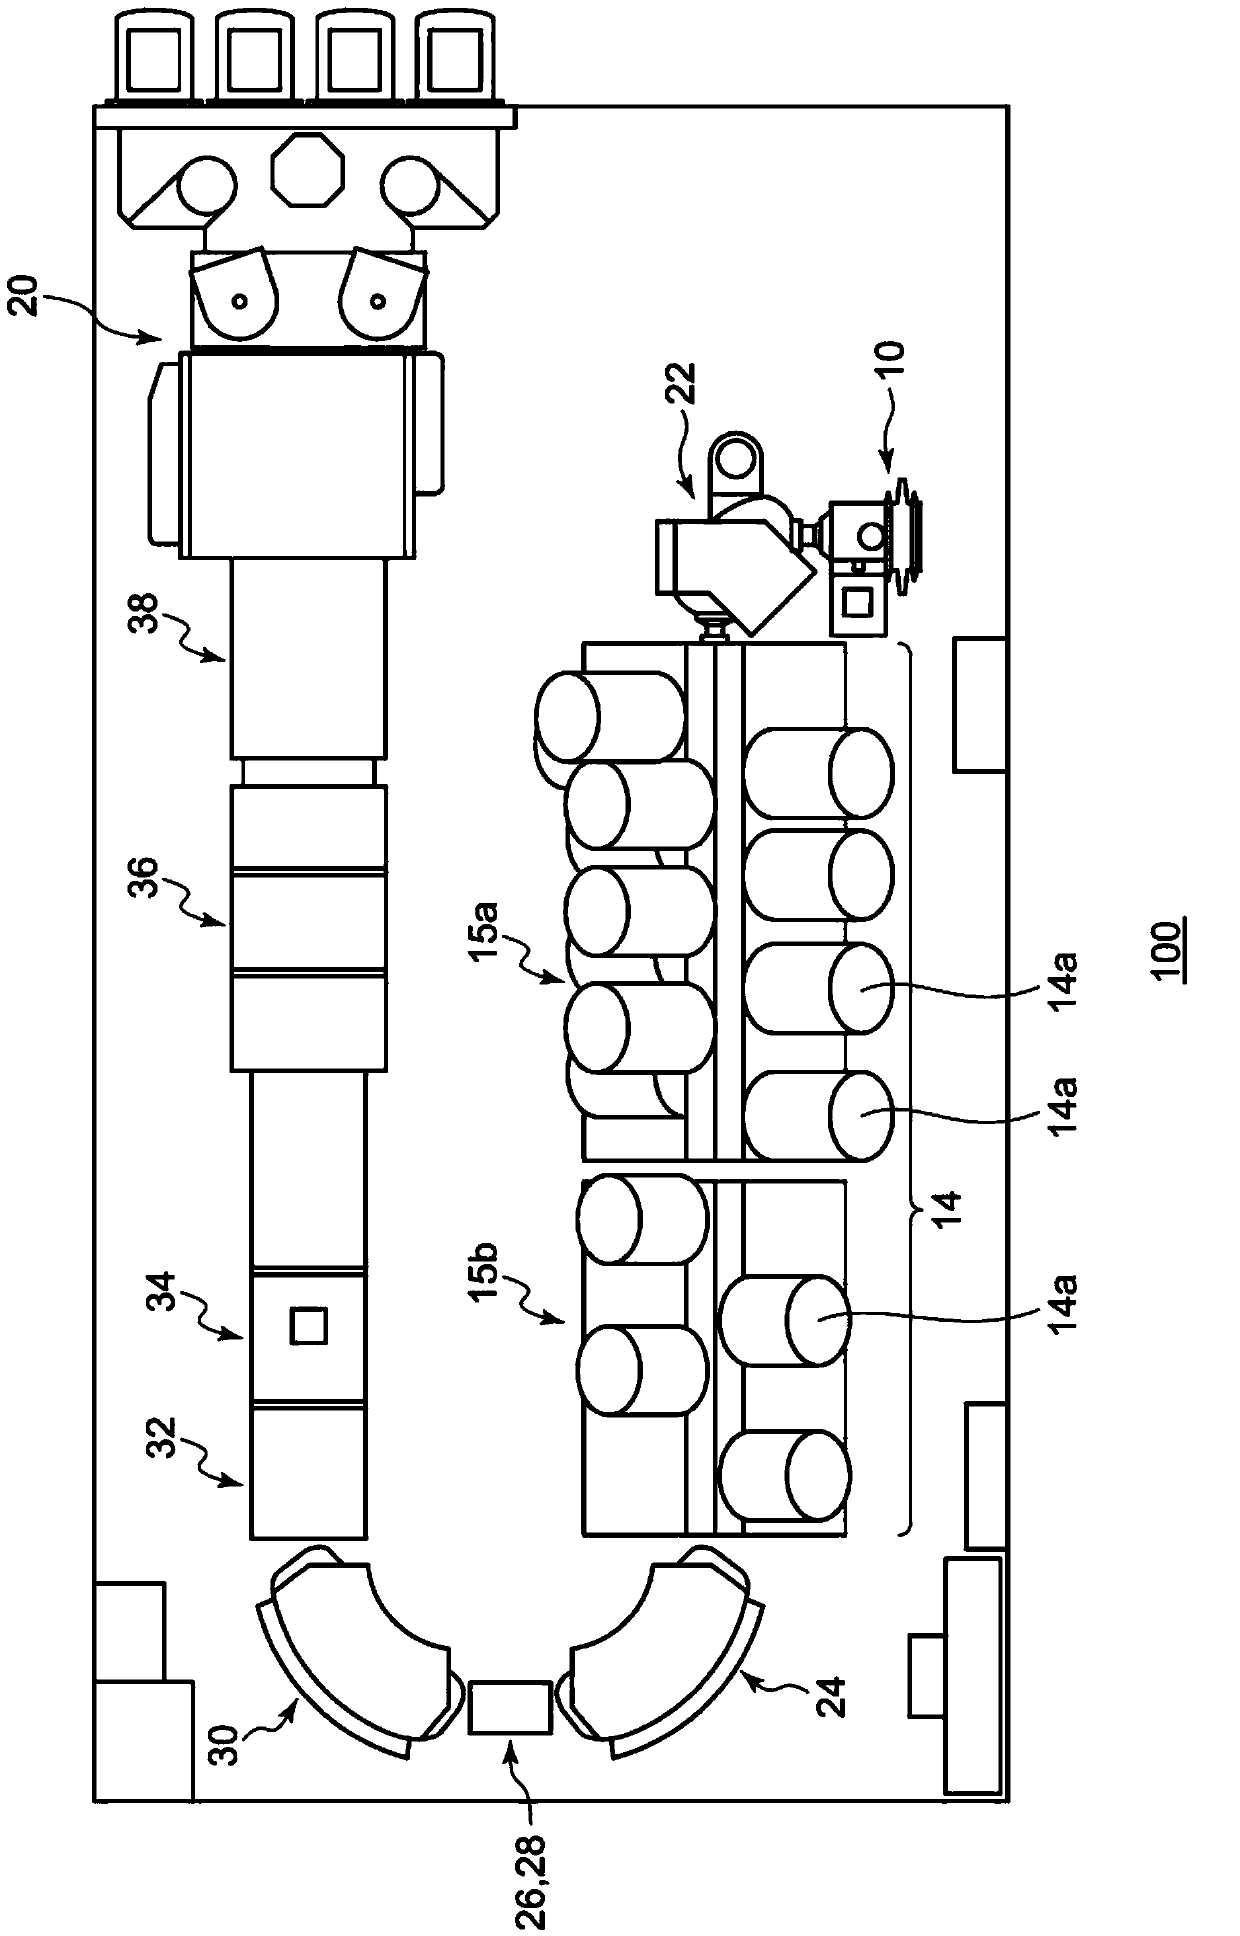 High-energy ion injection device